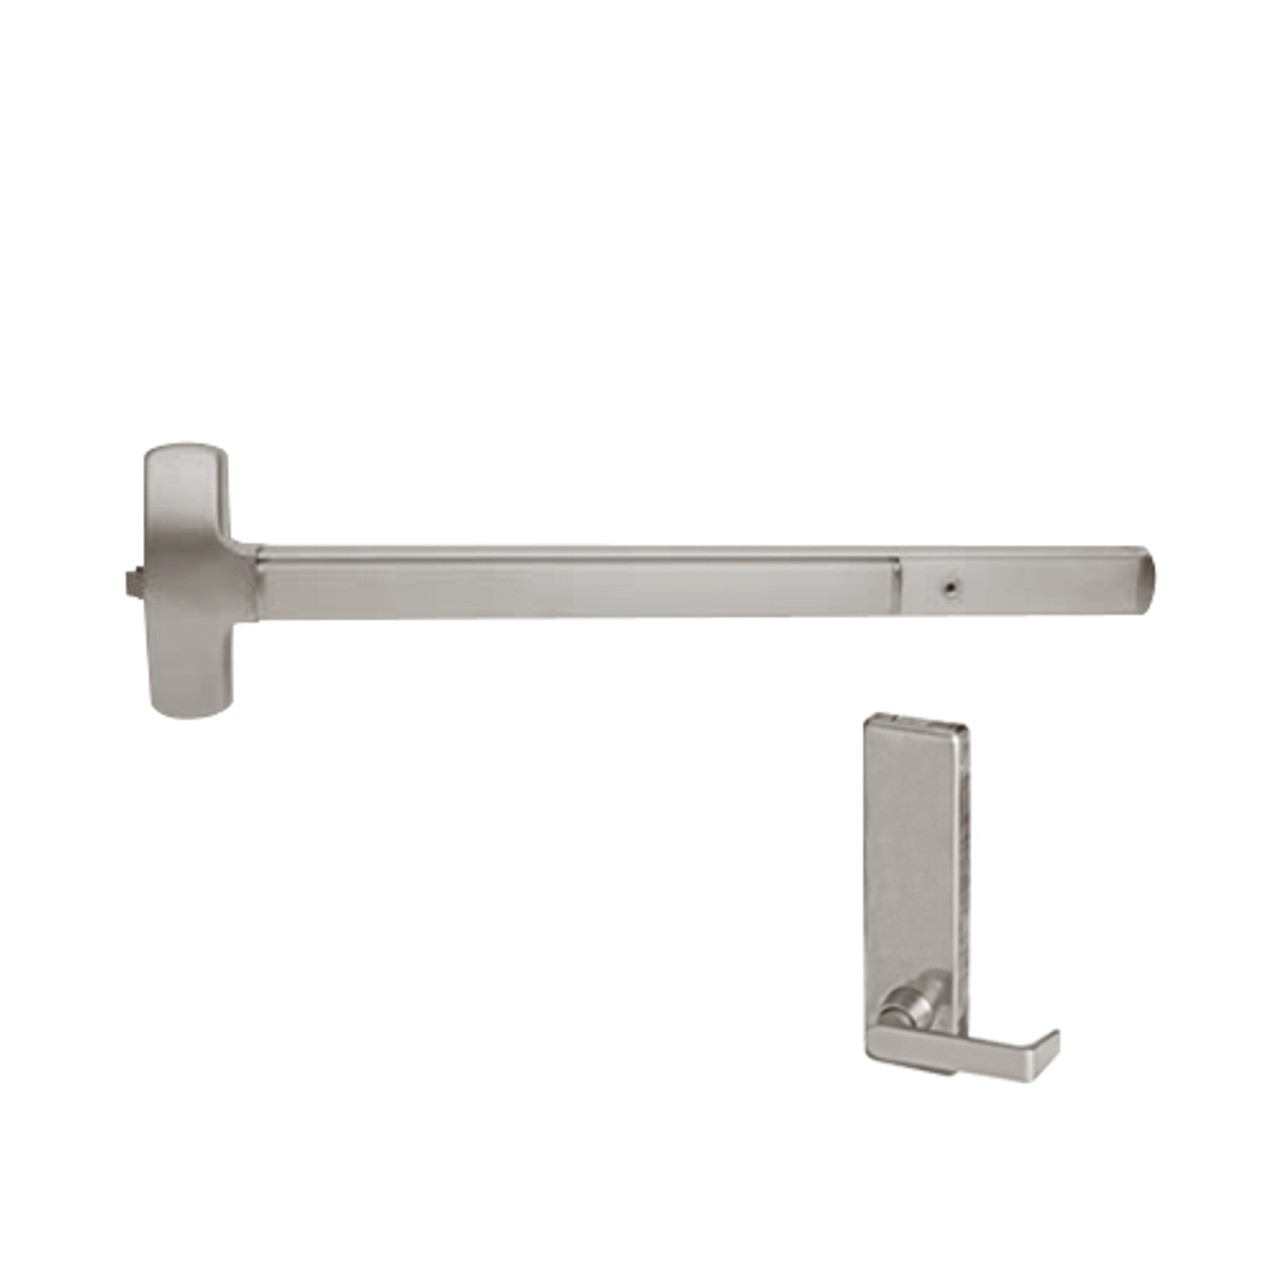 25-R-L-DT-DANE-US32D-3-LHR Falcon Exit Device in Satin Stainless Steel